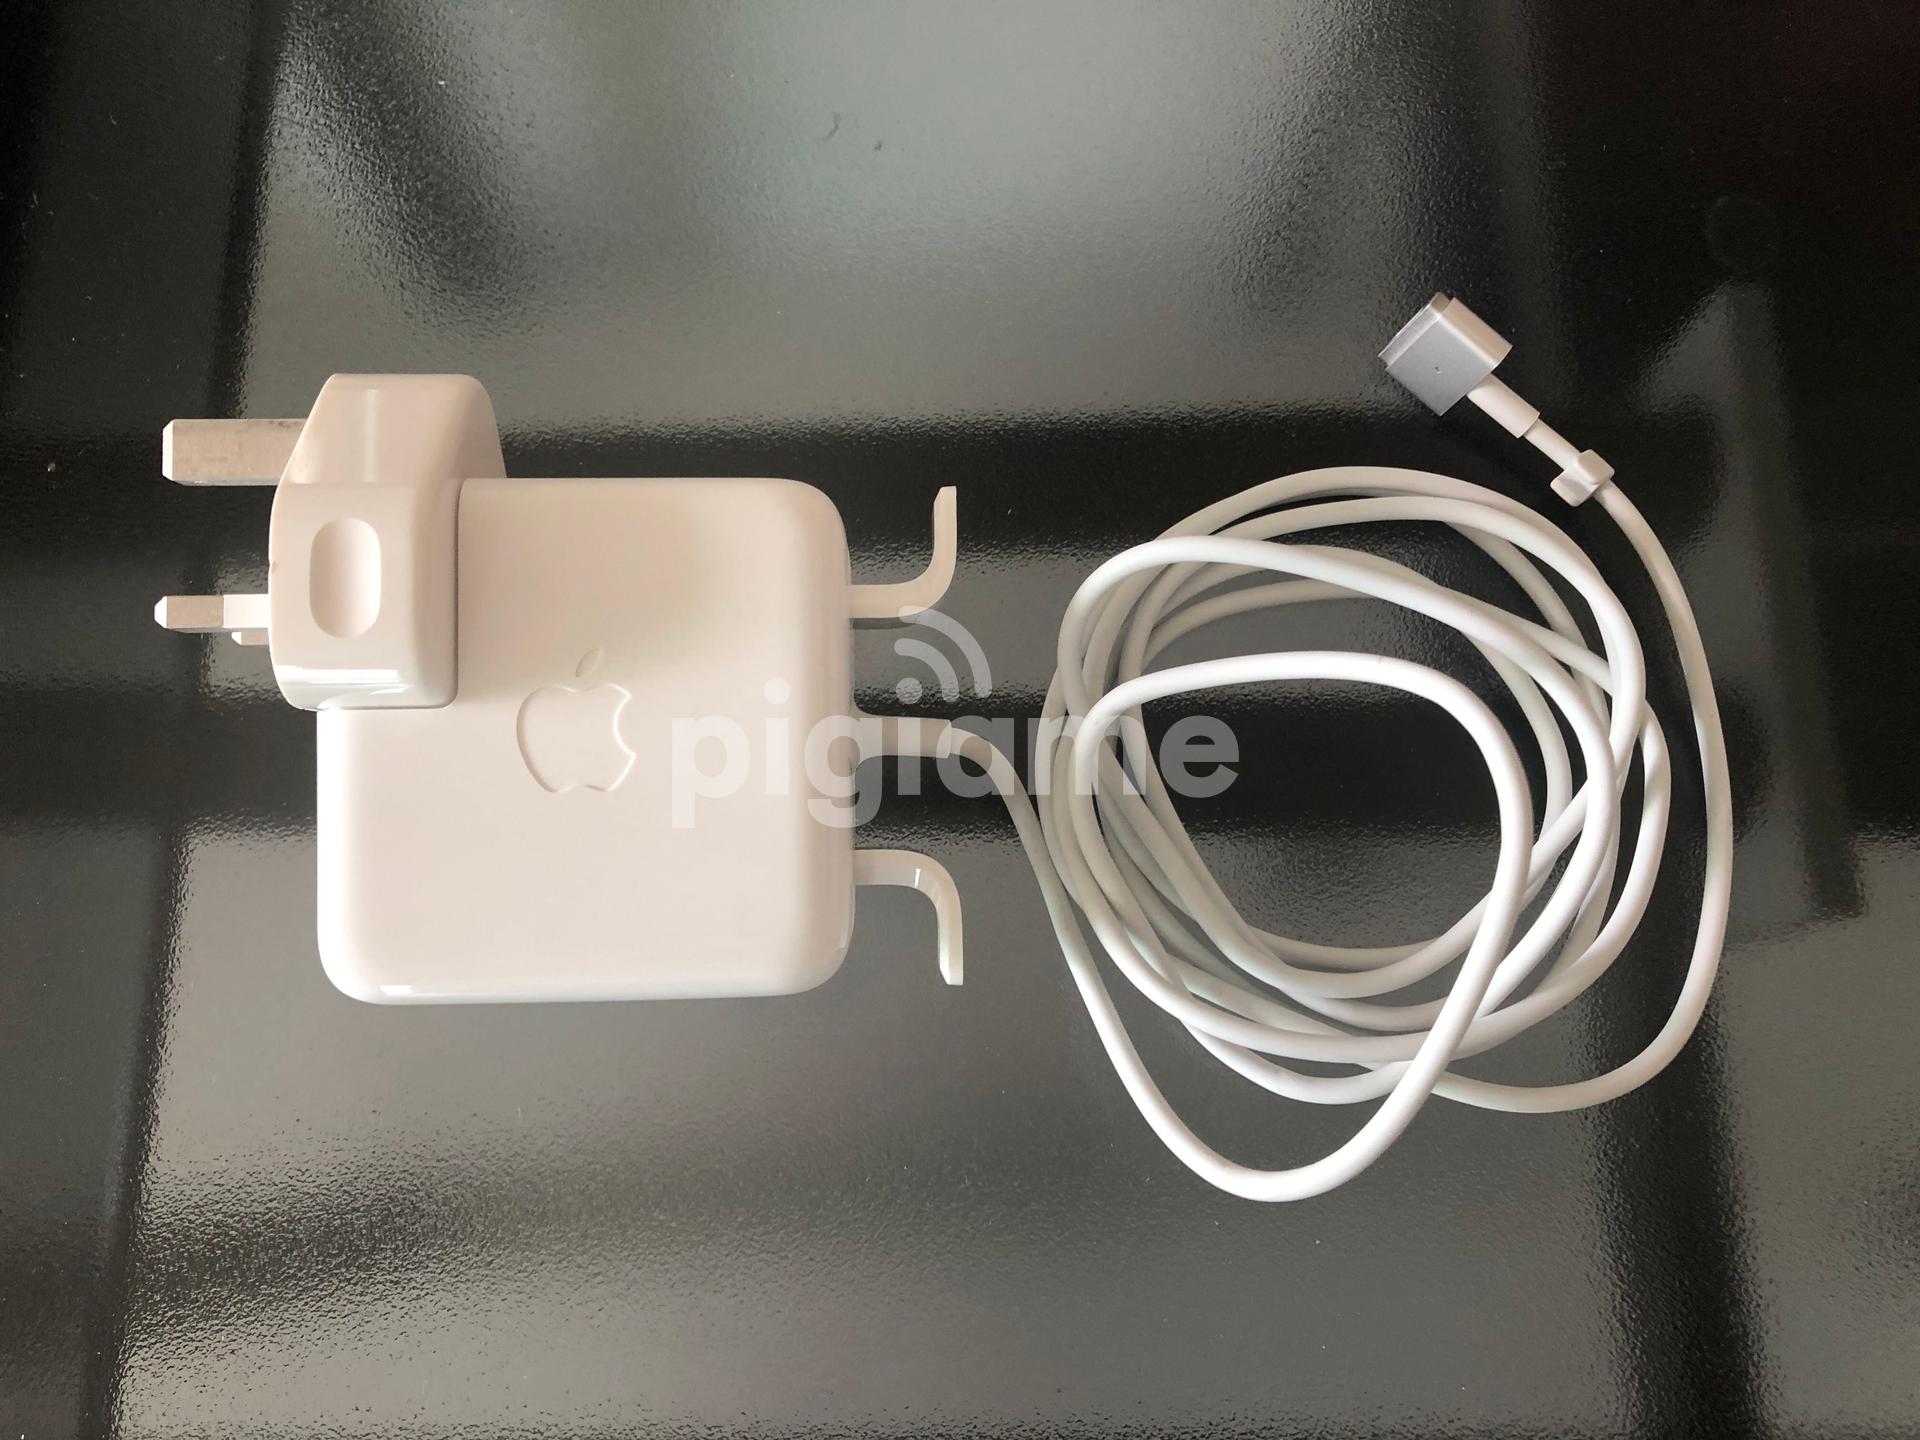 Genuine Apple 45W MagSafe 2 Power Adapter for MacBook Air (A1436